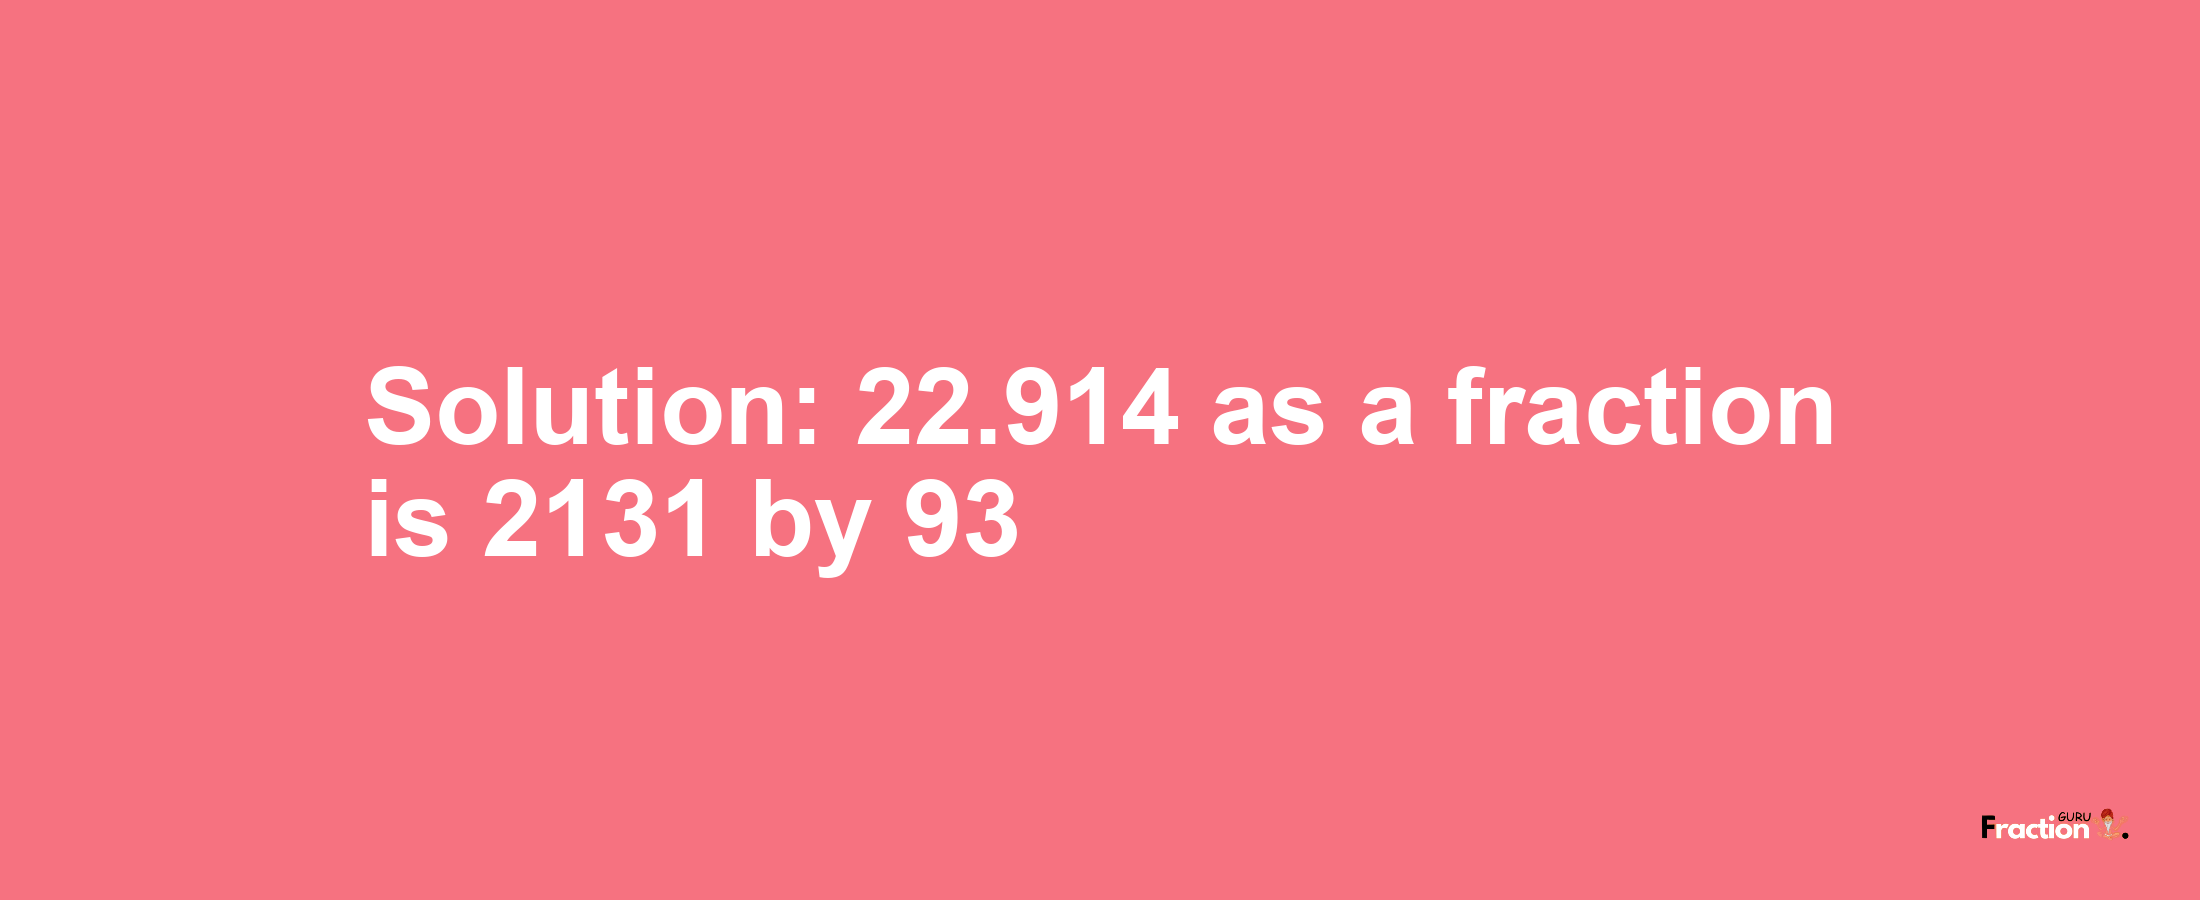 Solution:22.914 as a fraction is 2131/93